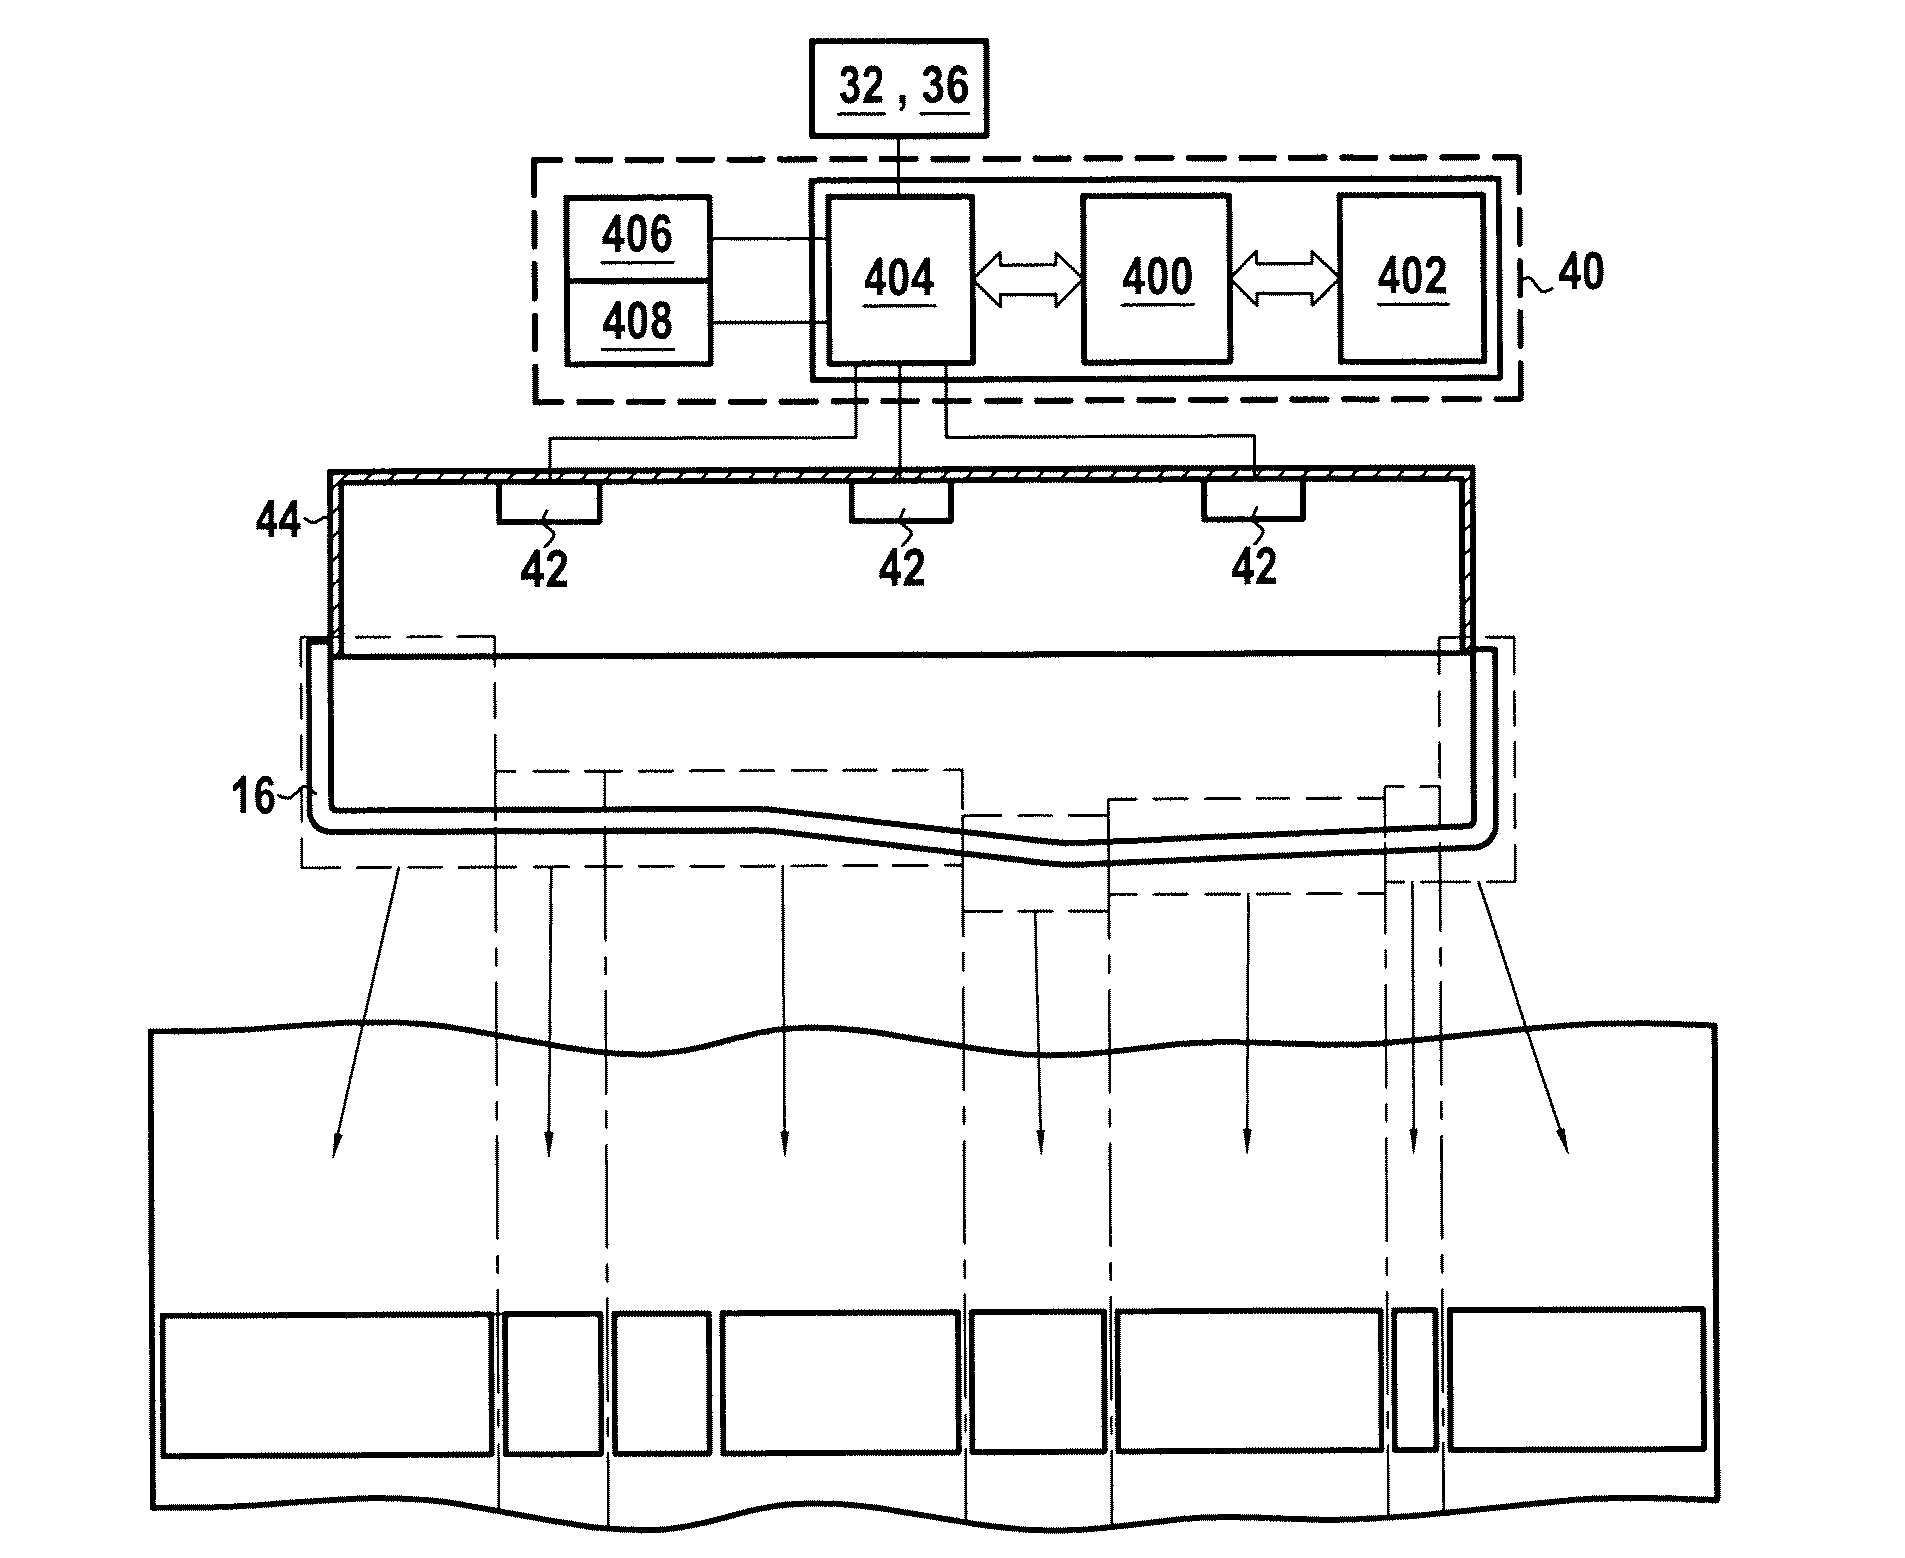 Machine for weaving or winding a fiber texture and enabling anomalies to be inspected by image analysis